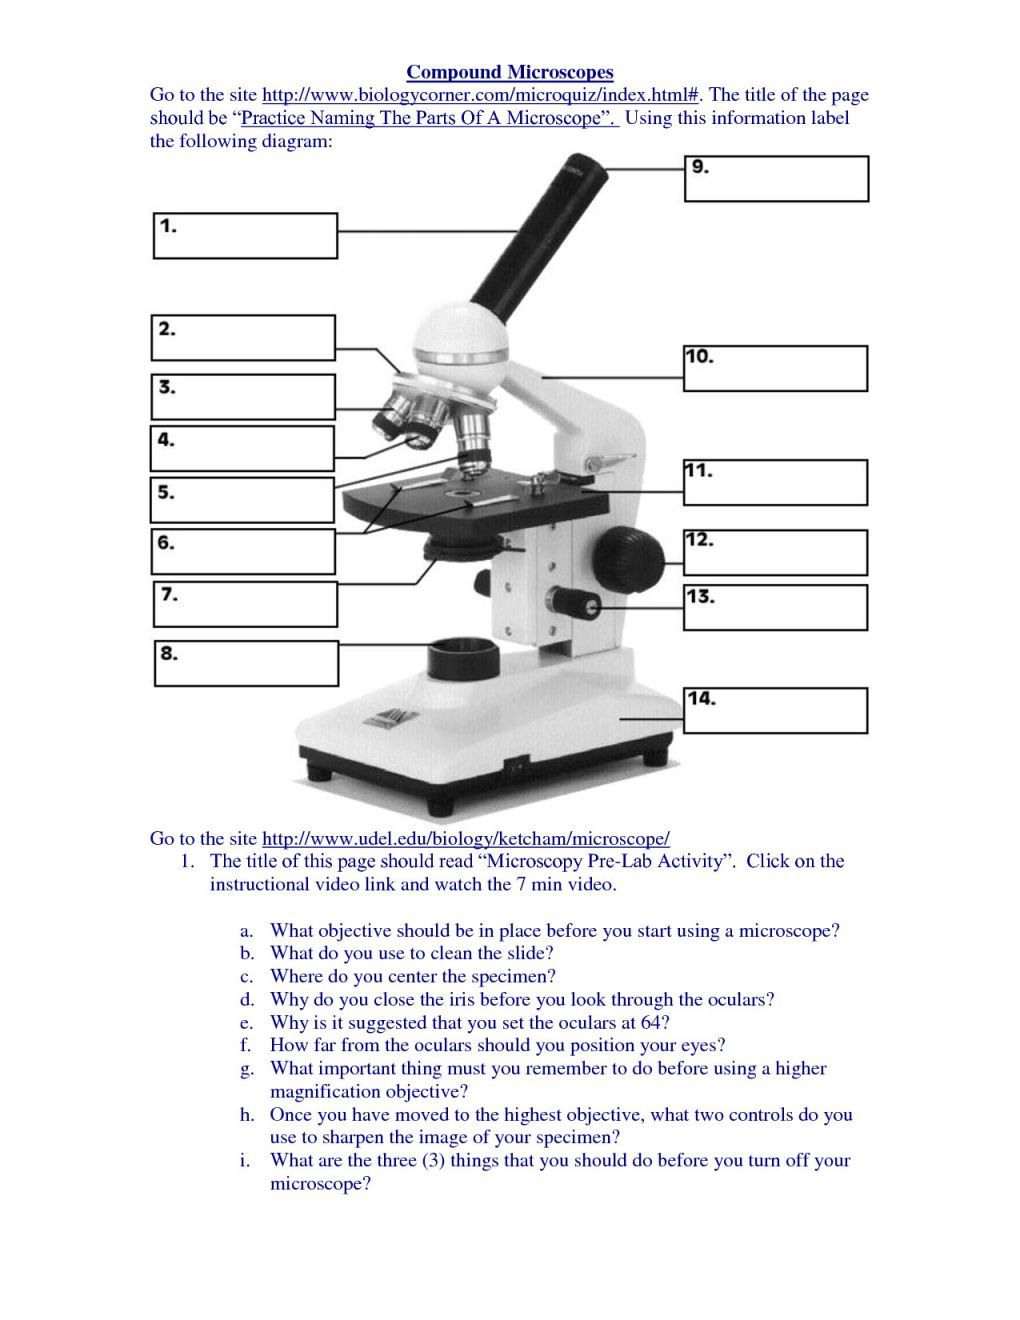 parts-of-a-microscope-worksheet-answers-db-excel